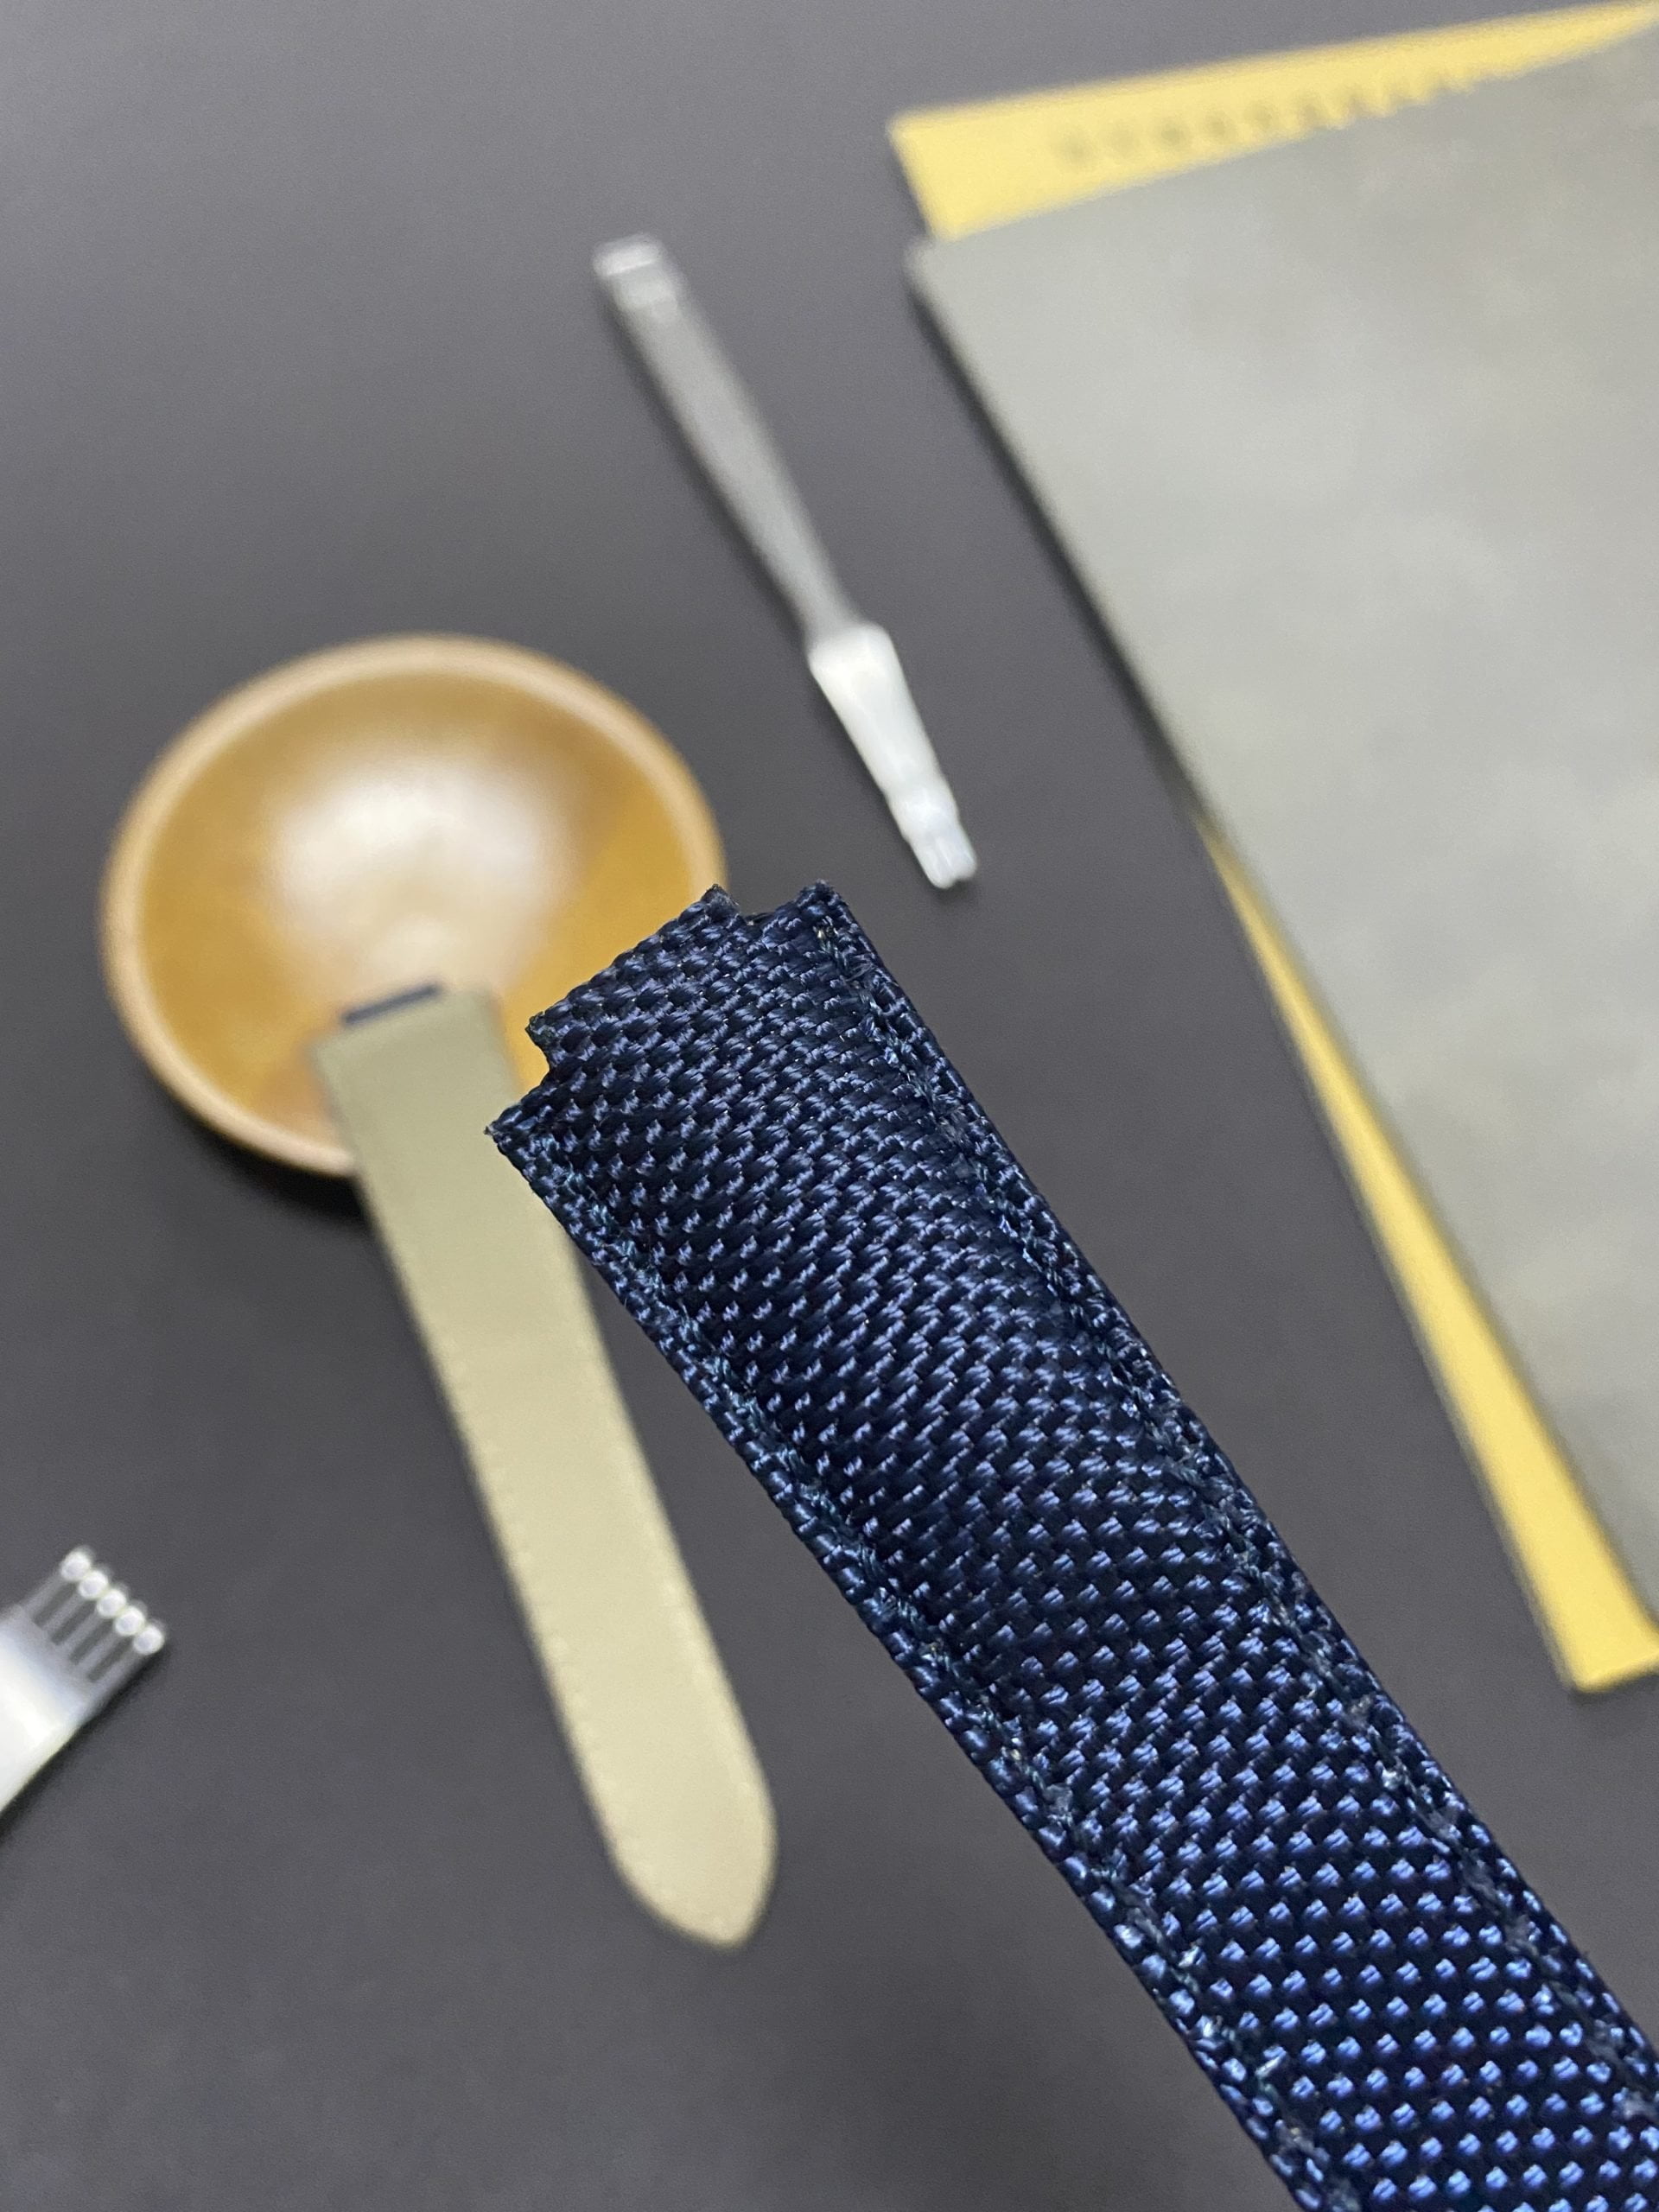 The best quality OEM custom nylon canvas fabric material watcg kevlar strap and watch band replacment for Cartier Ballon Bleu watches online Shop the premium aftermarket straps and watchbands from dr watchstrap